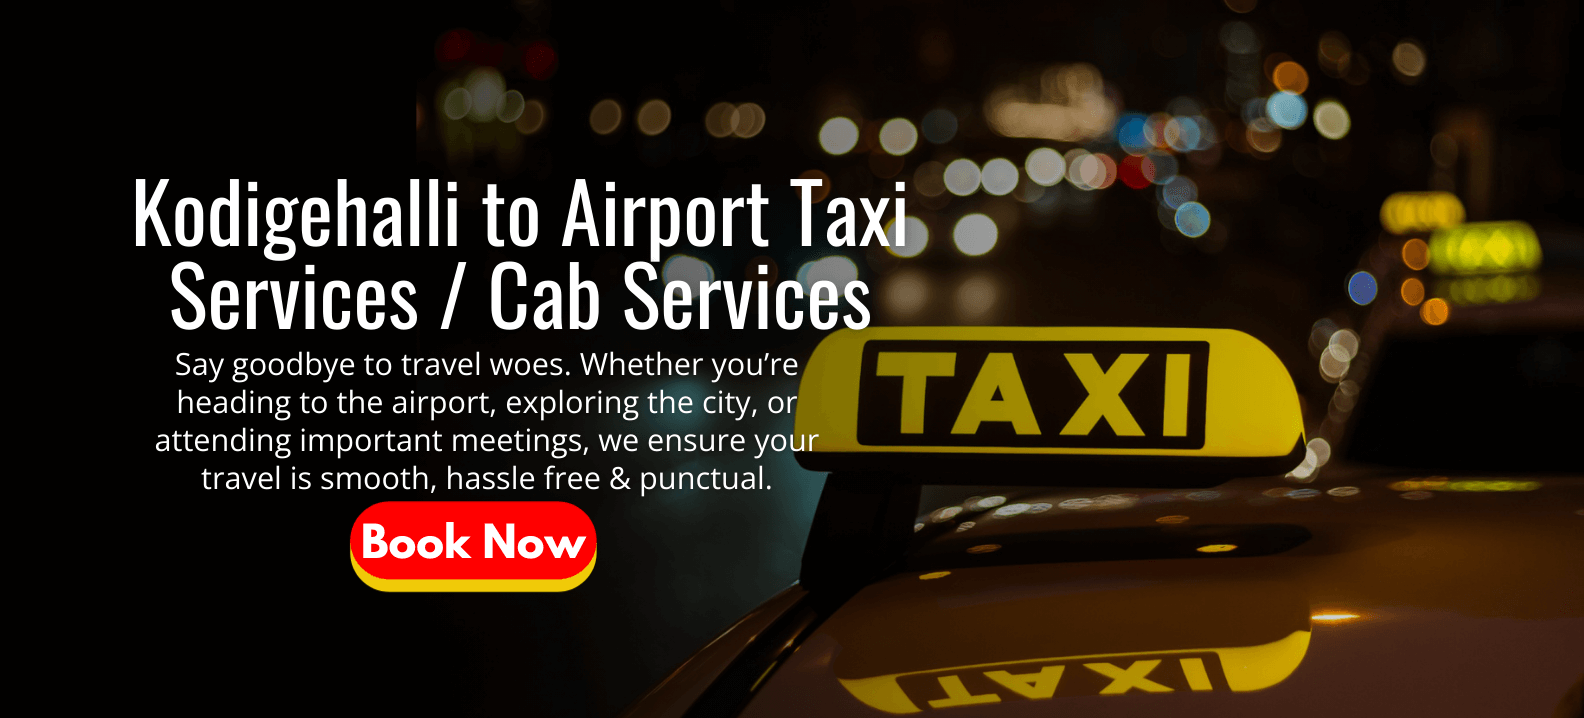 Kodigehalli to Airport Taxi Services _ Cab Services